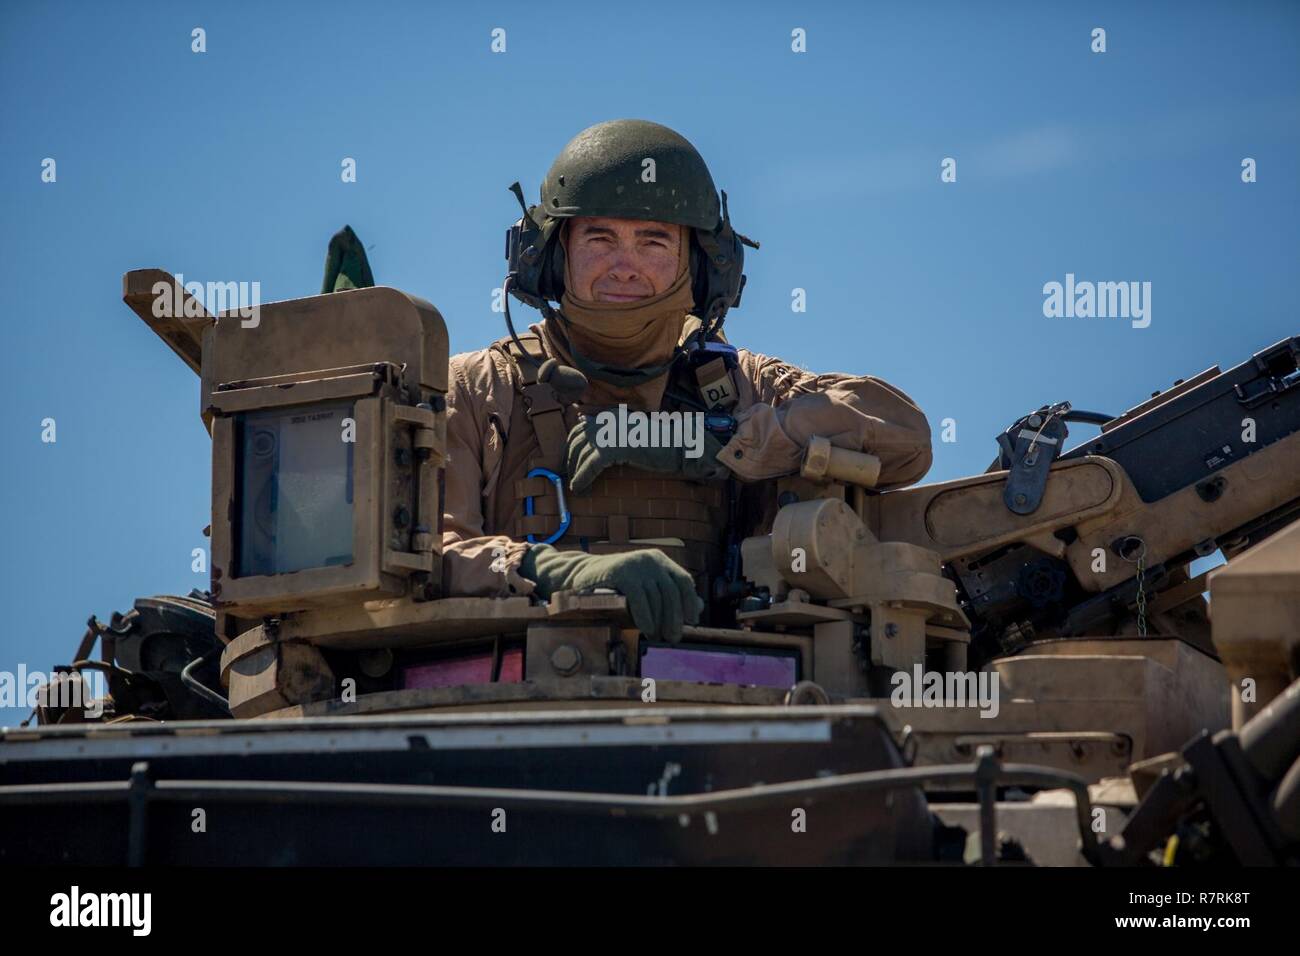 Major Gen. John K. Love sits atop an M1A1 Abrams Tank at Camp Lejeune, N.C., April 5, 2017. Love spent time interacting with the Marines of Bravo Company, 2nd Tank Battalion while controlling a tank and its various weapons systems. Love is the commanding general of 2nd Marine Division. Stock Photo